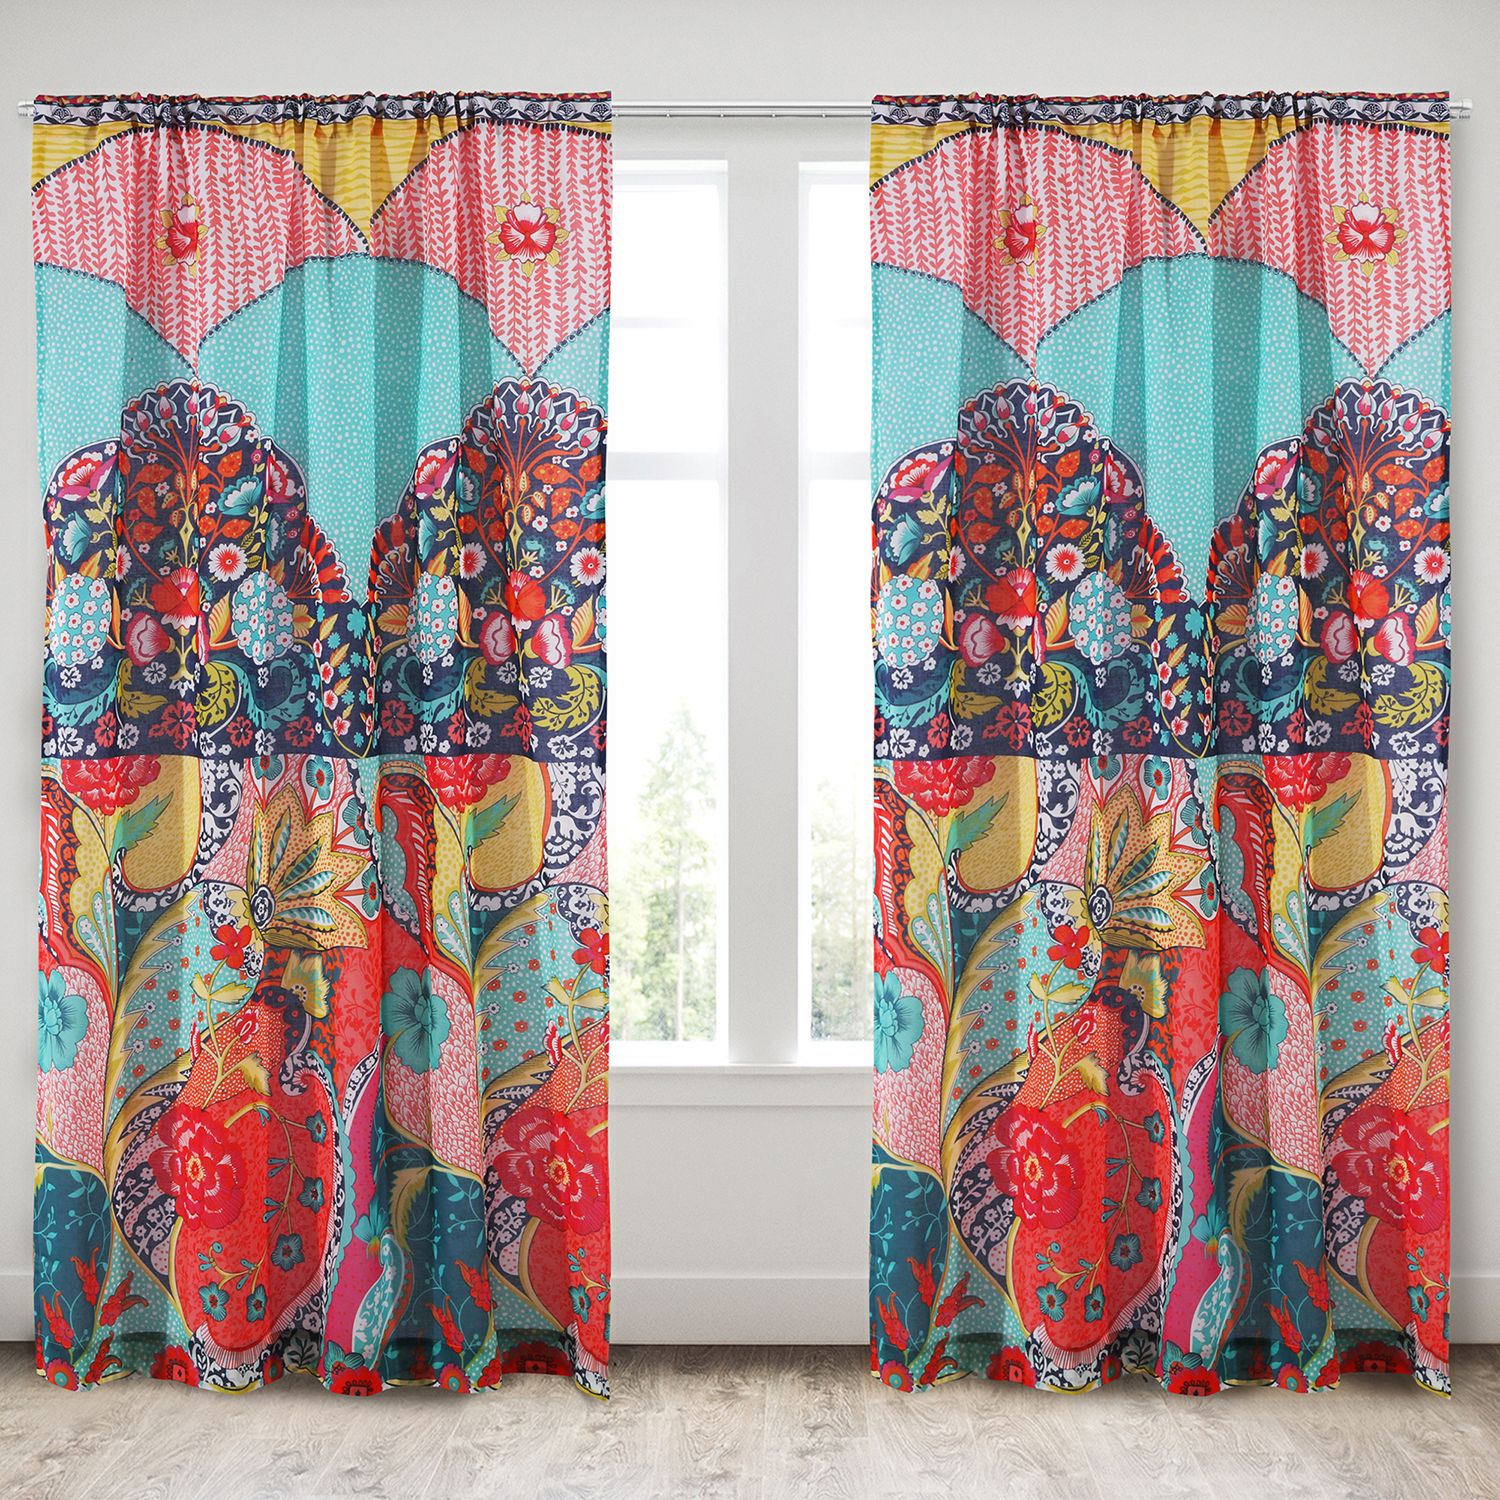 Image for Levtex Home Jules Window Curtain at Kohl's.